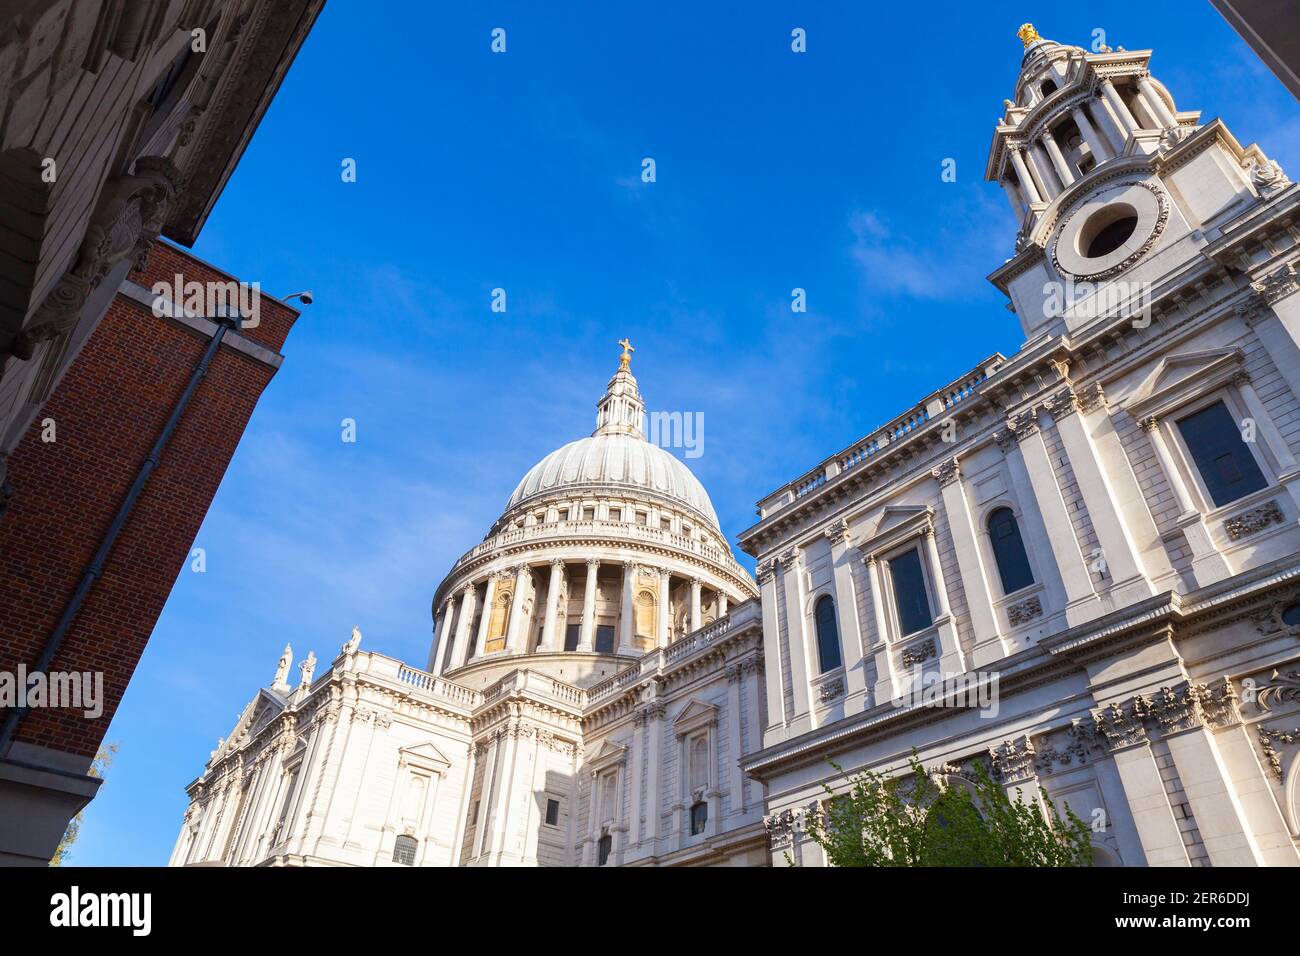 Saint Paul Cathedral under blue sky on a sunny day, London, United Kingdom Stock Photo